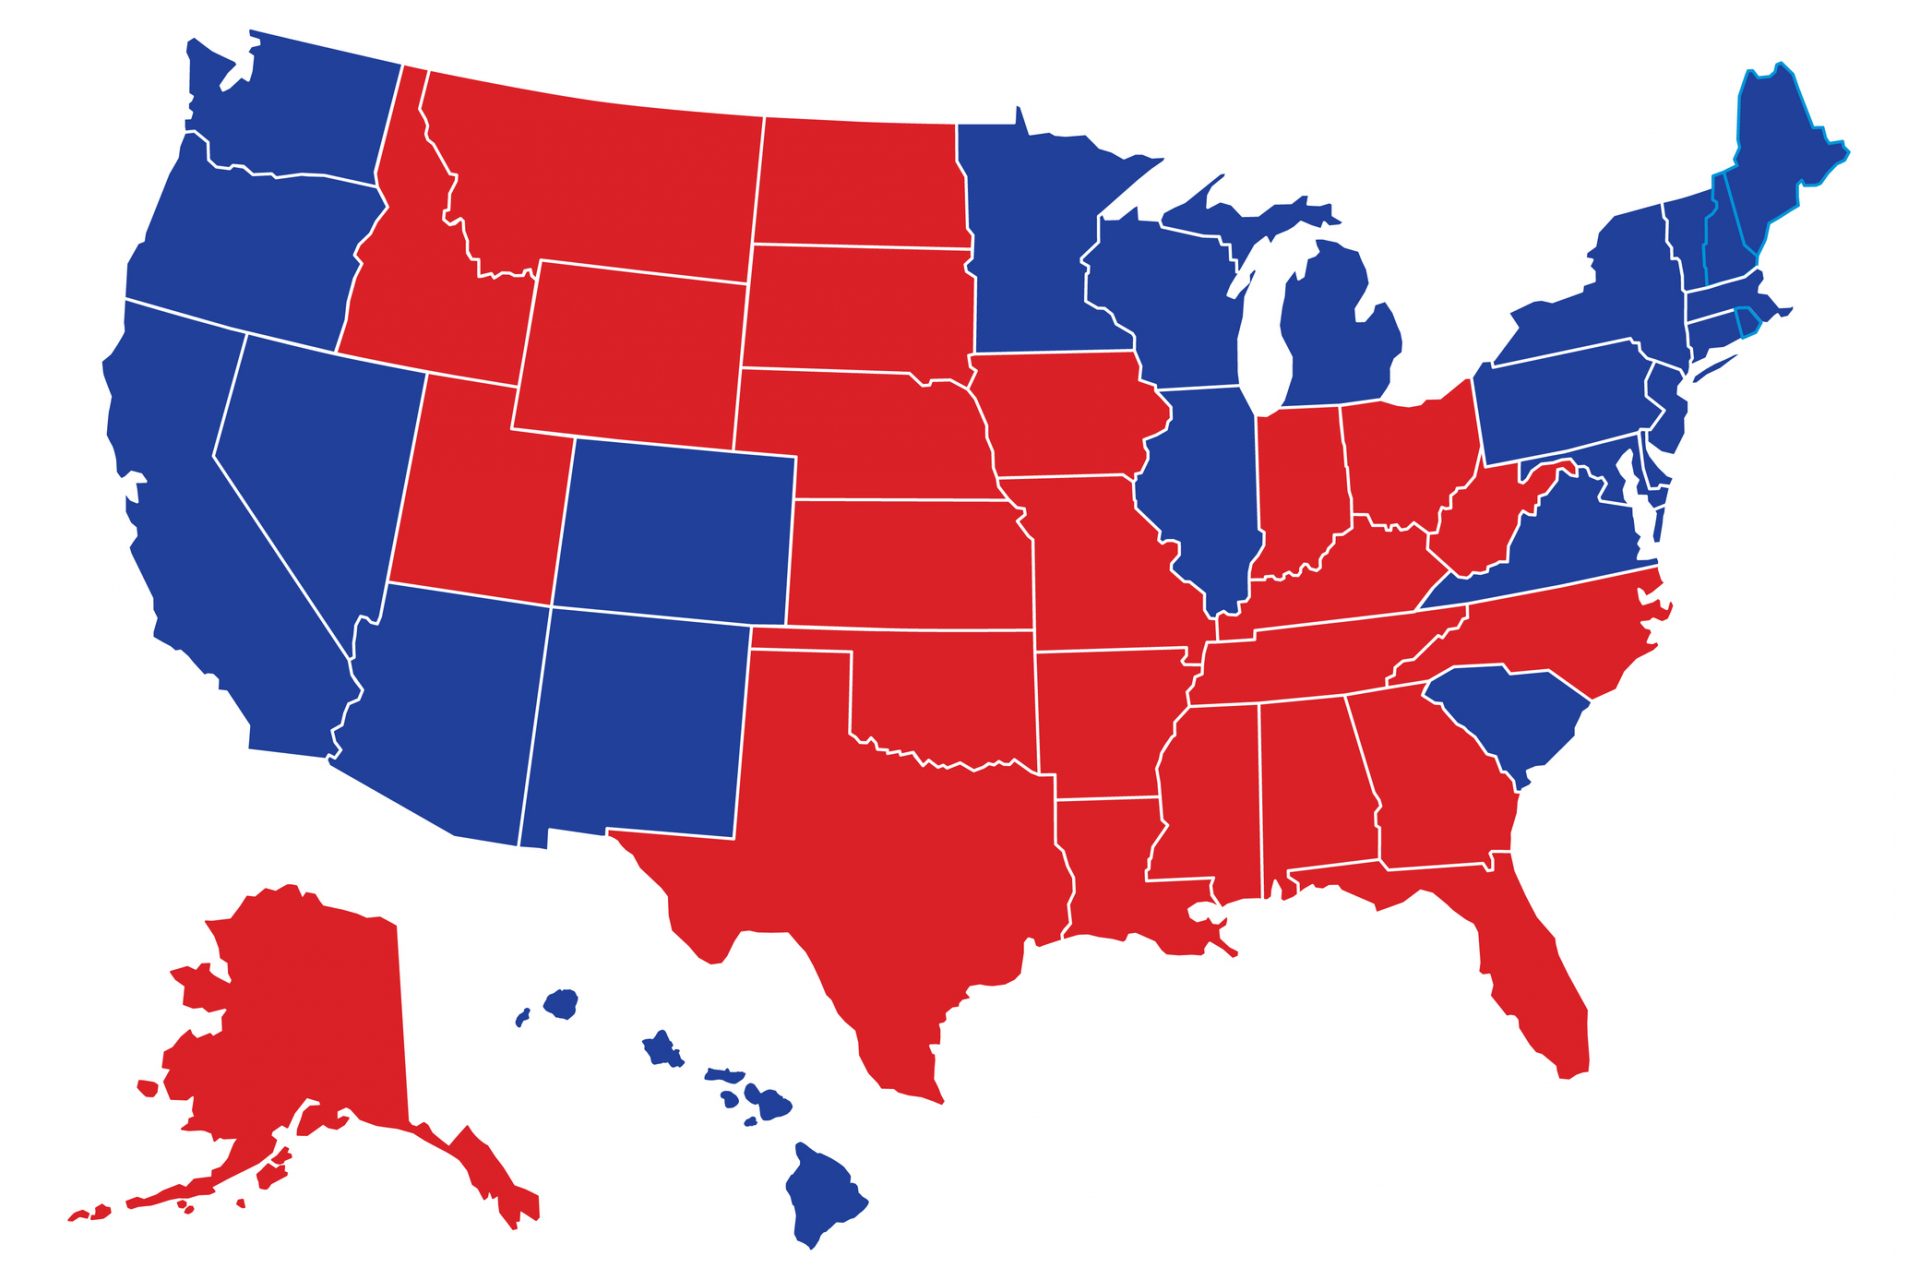 Red states were more likely to be supporters 